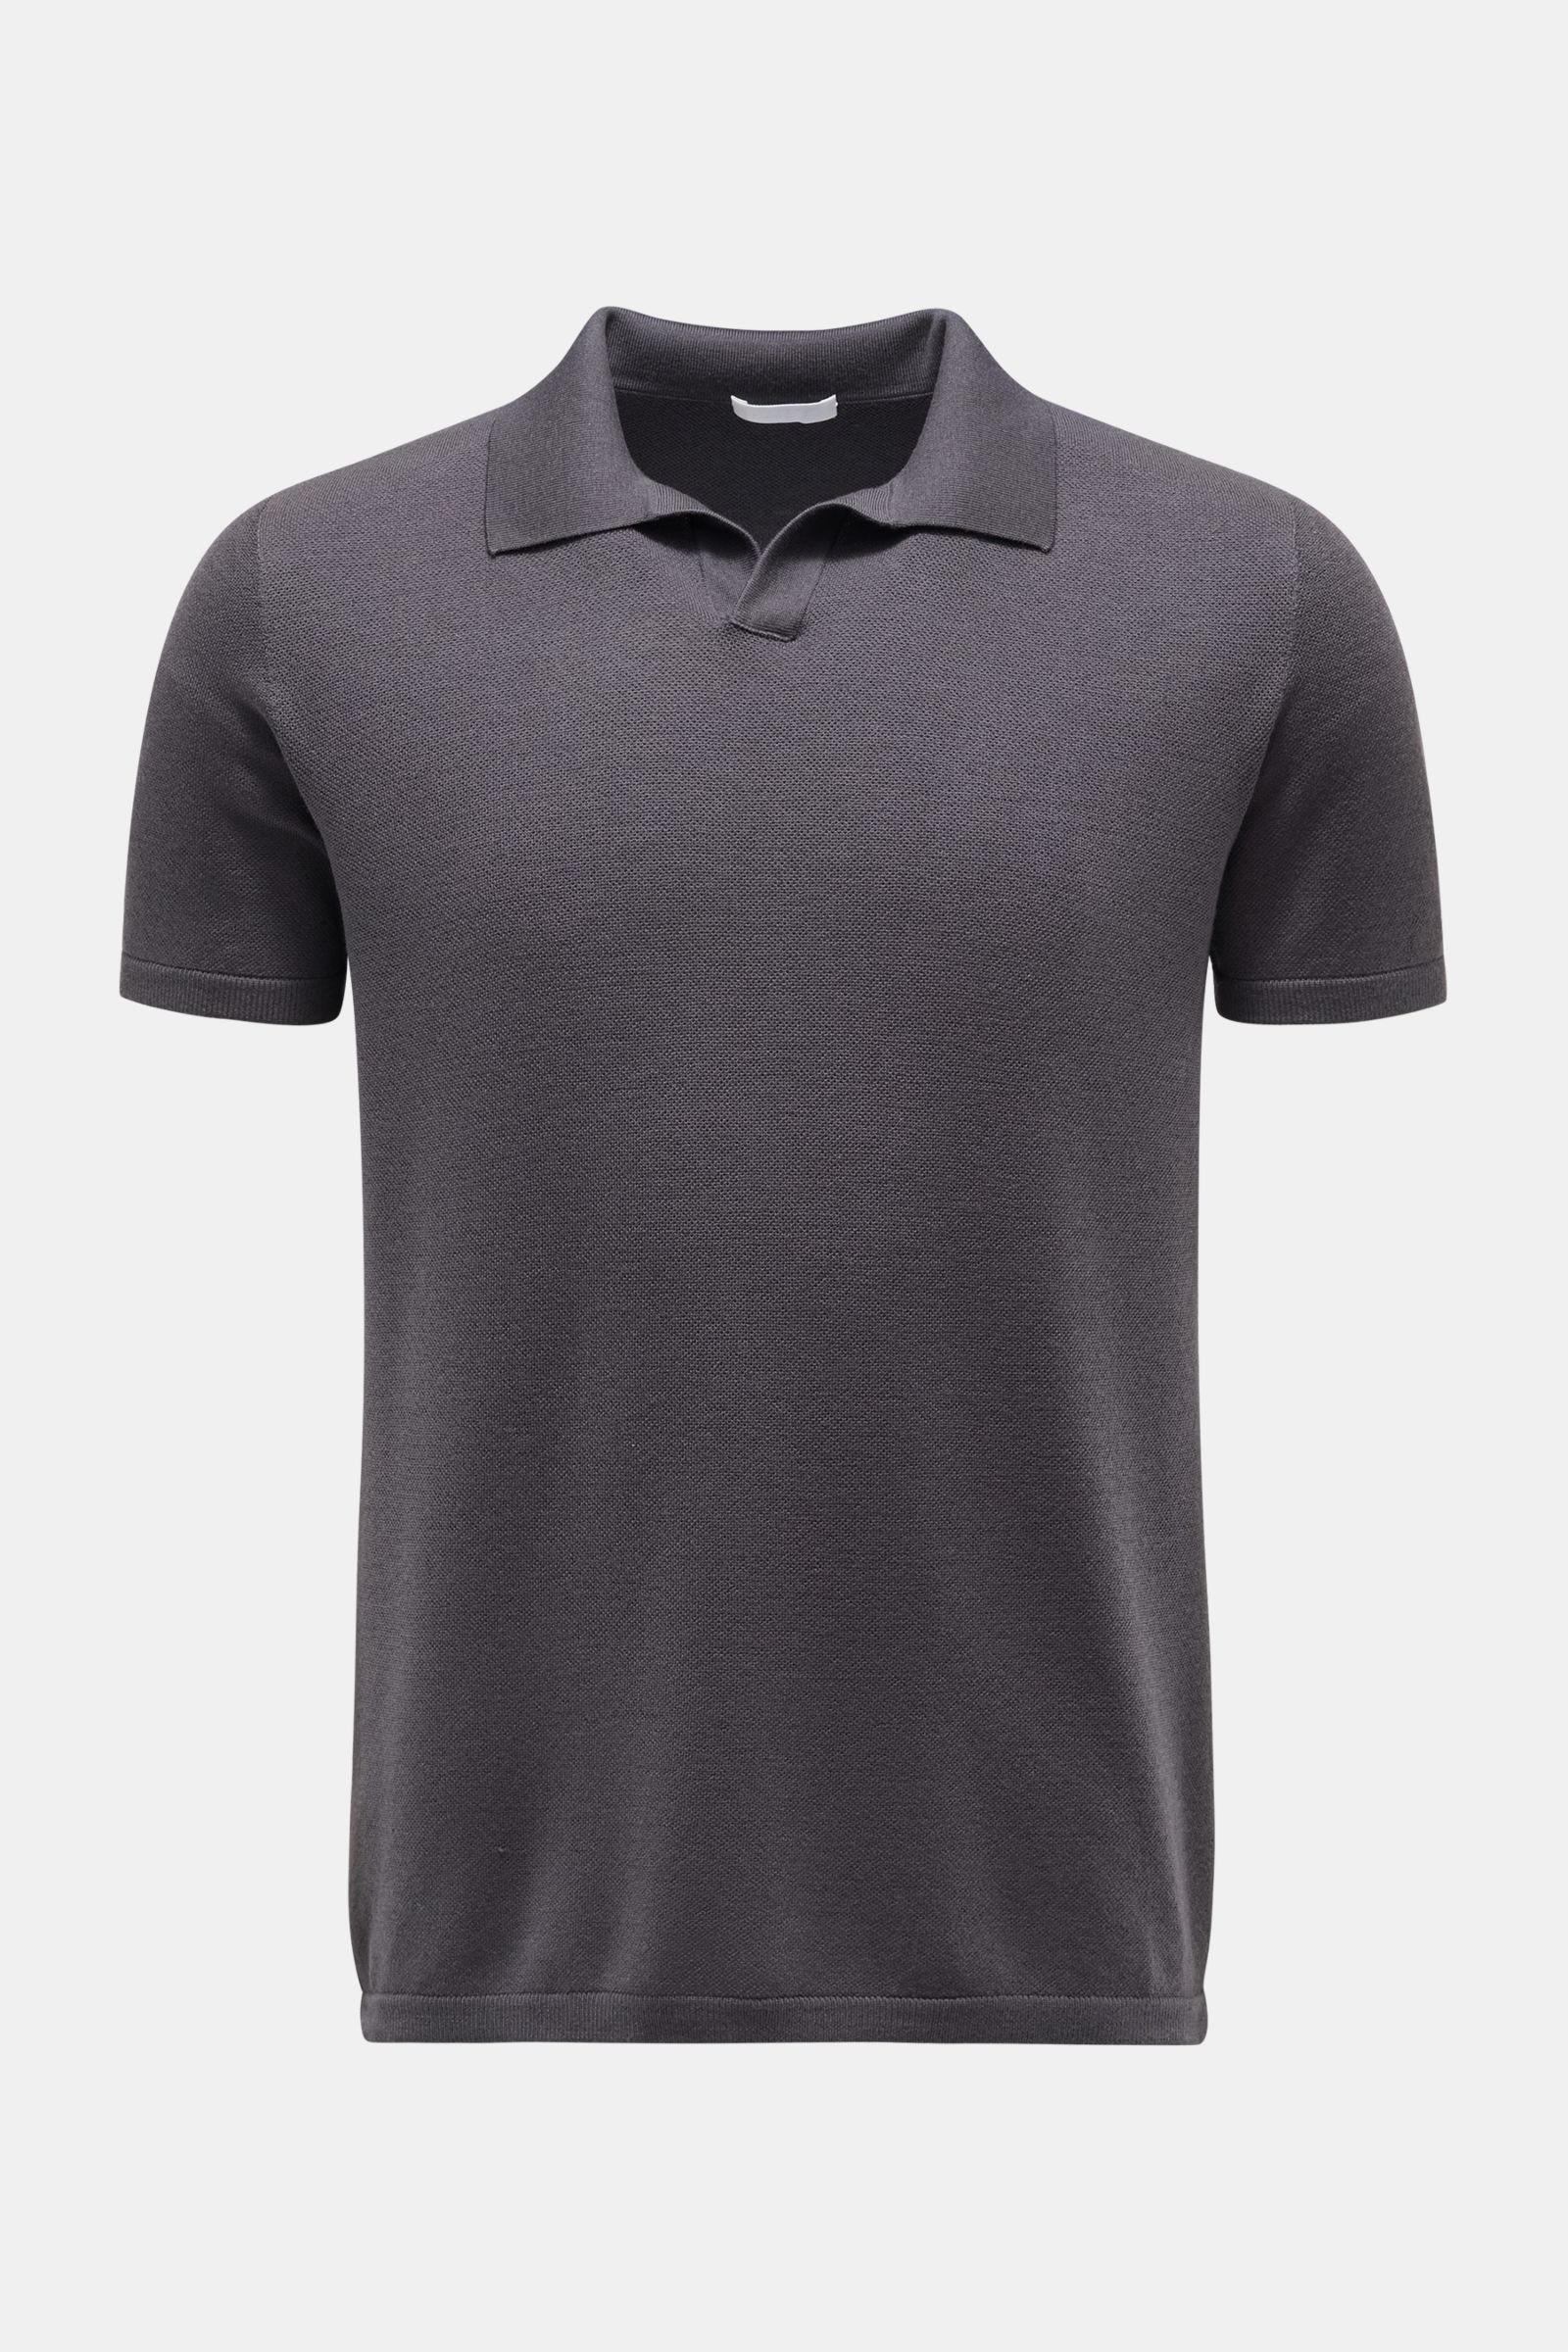 Short sleeve knit polo 'The Ultimate Polo' anthracite